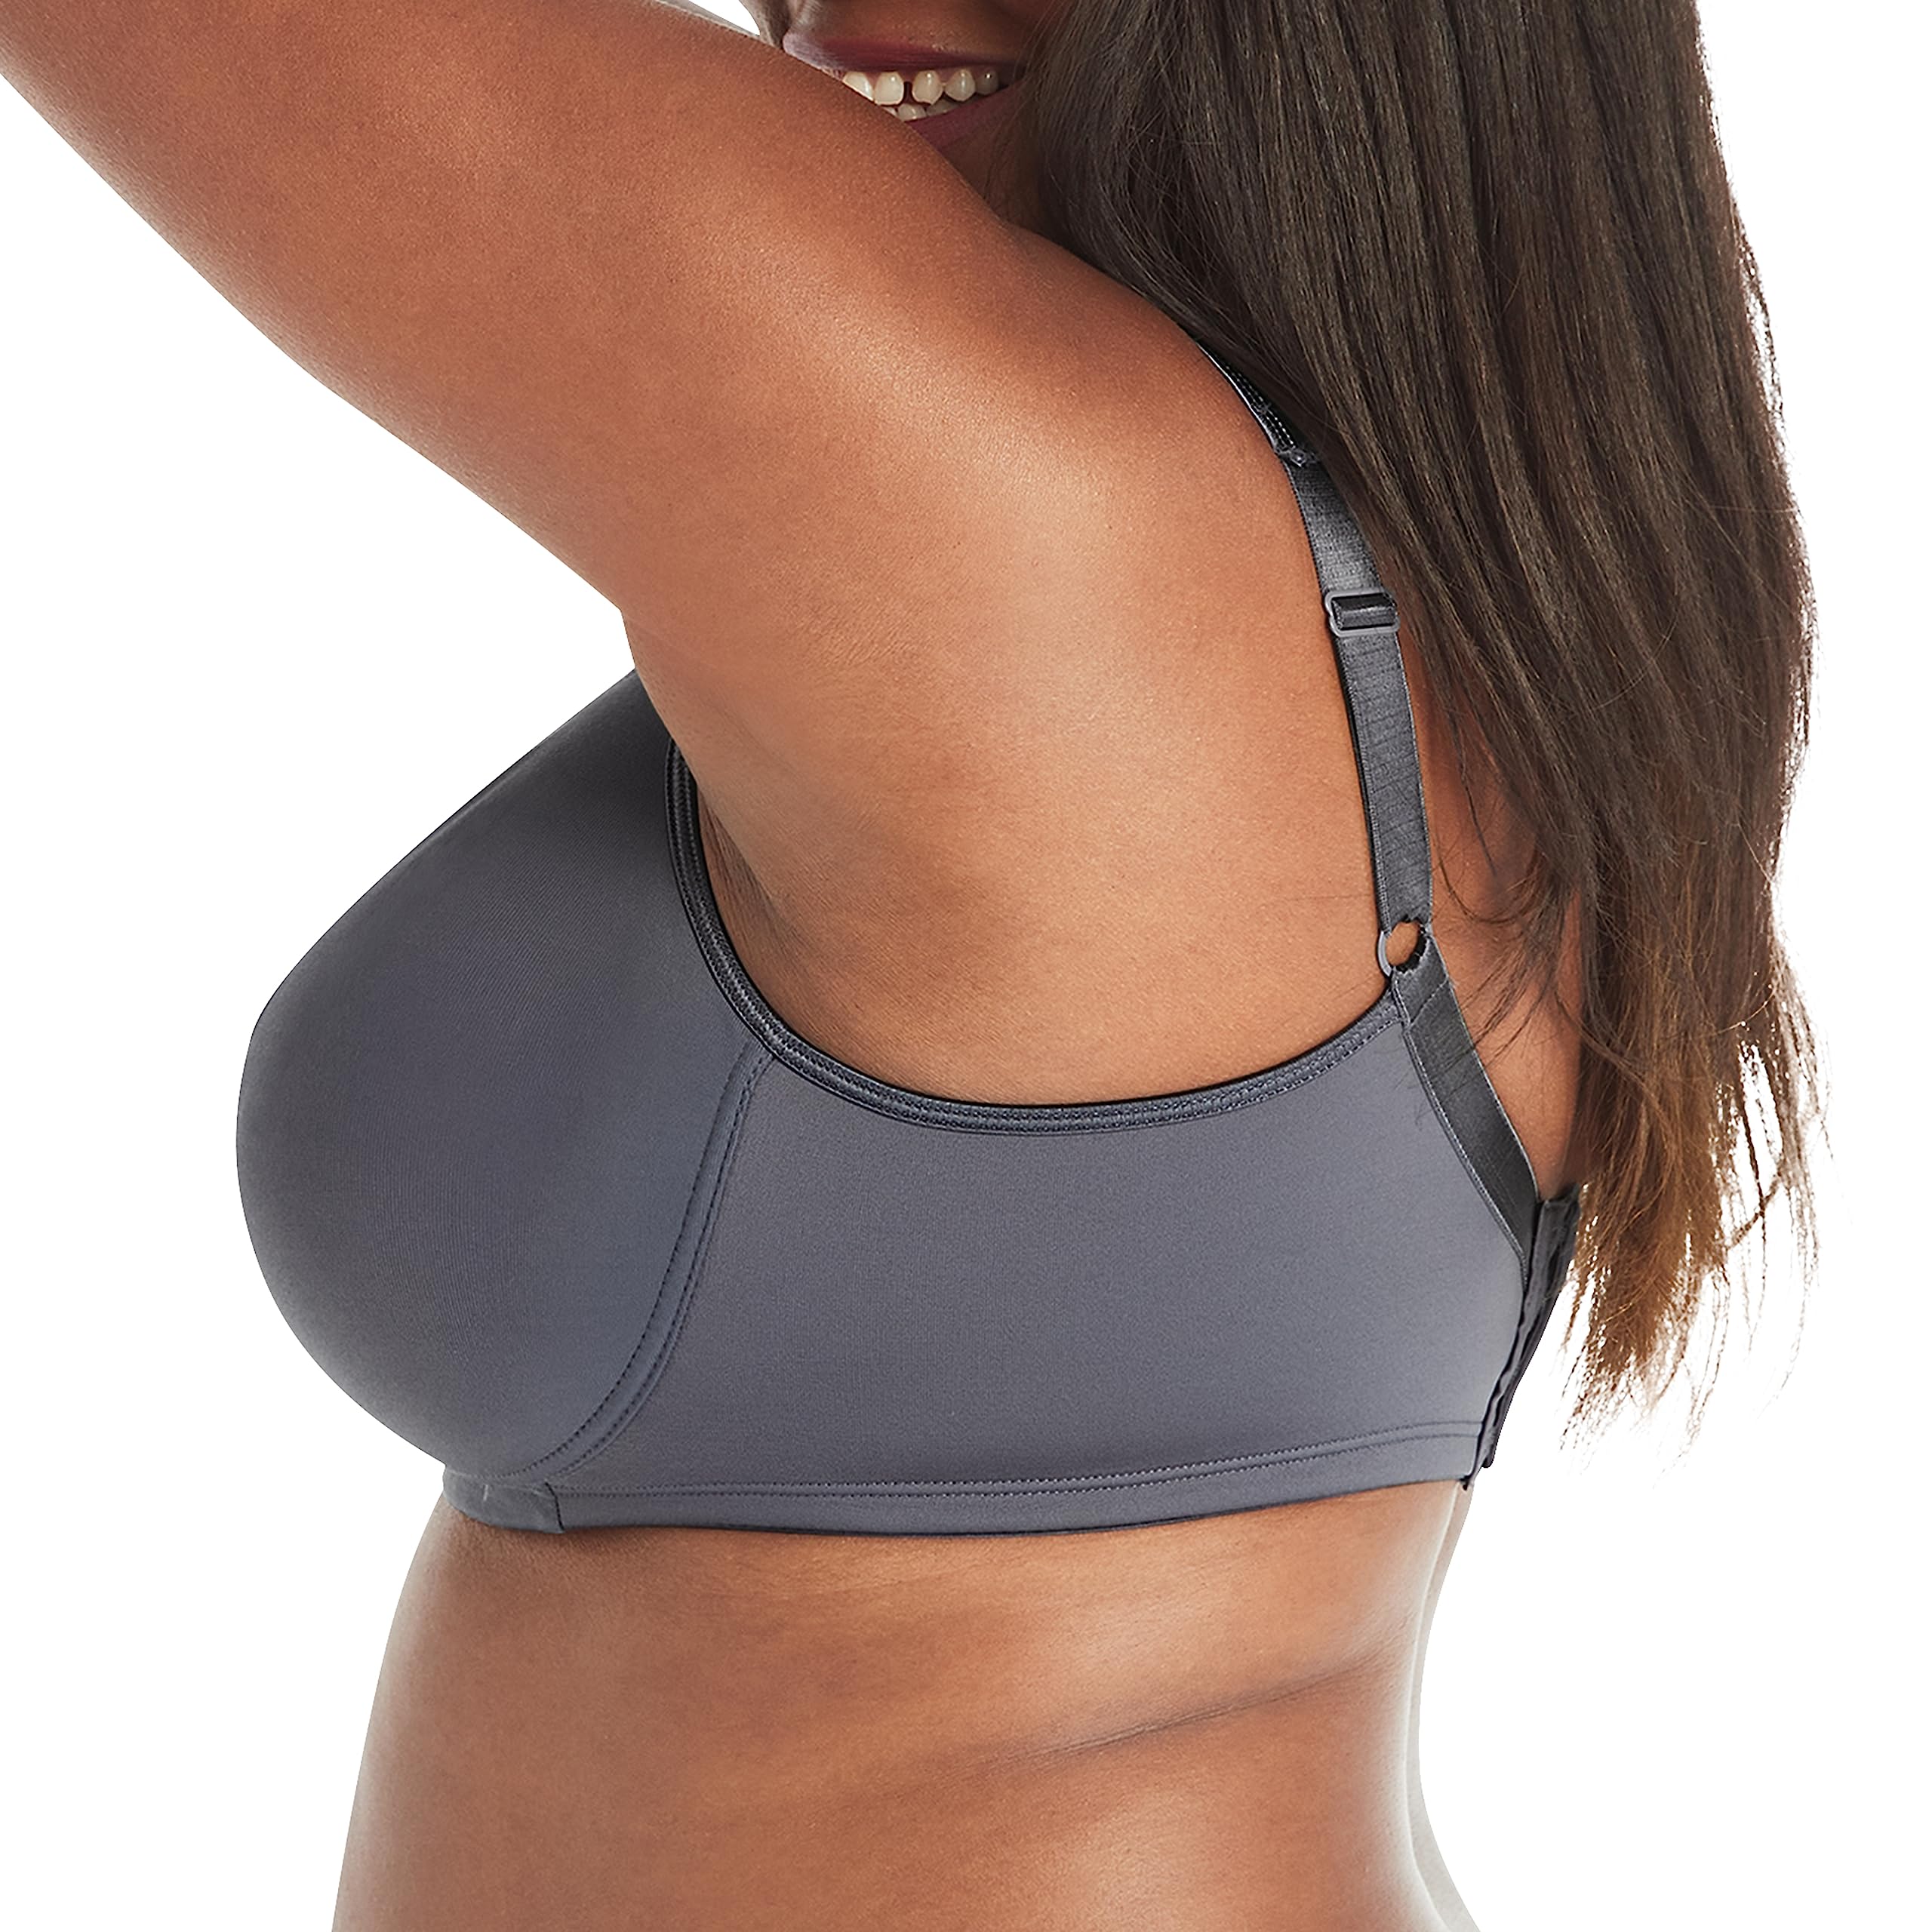 Playtex Women's 18 Hour Silky Soft Smoothing Wireless Bra Us4803 Available with 2-Pack Option